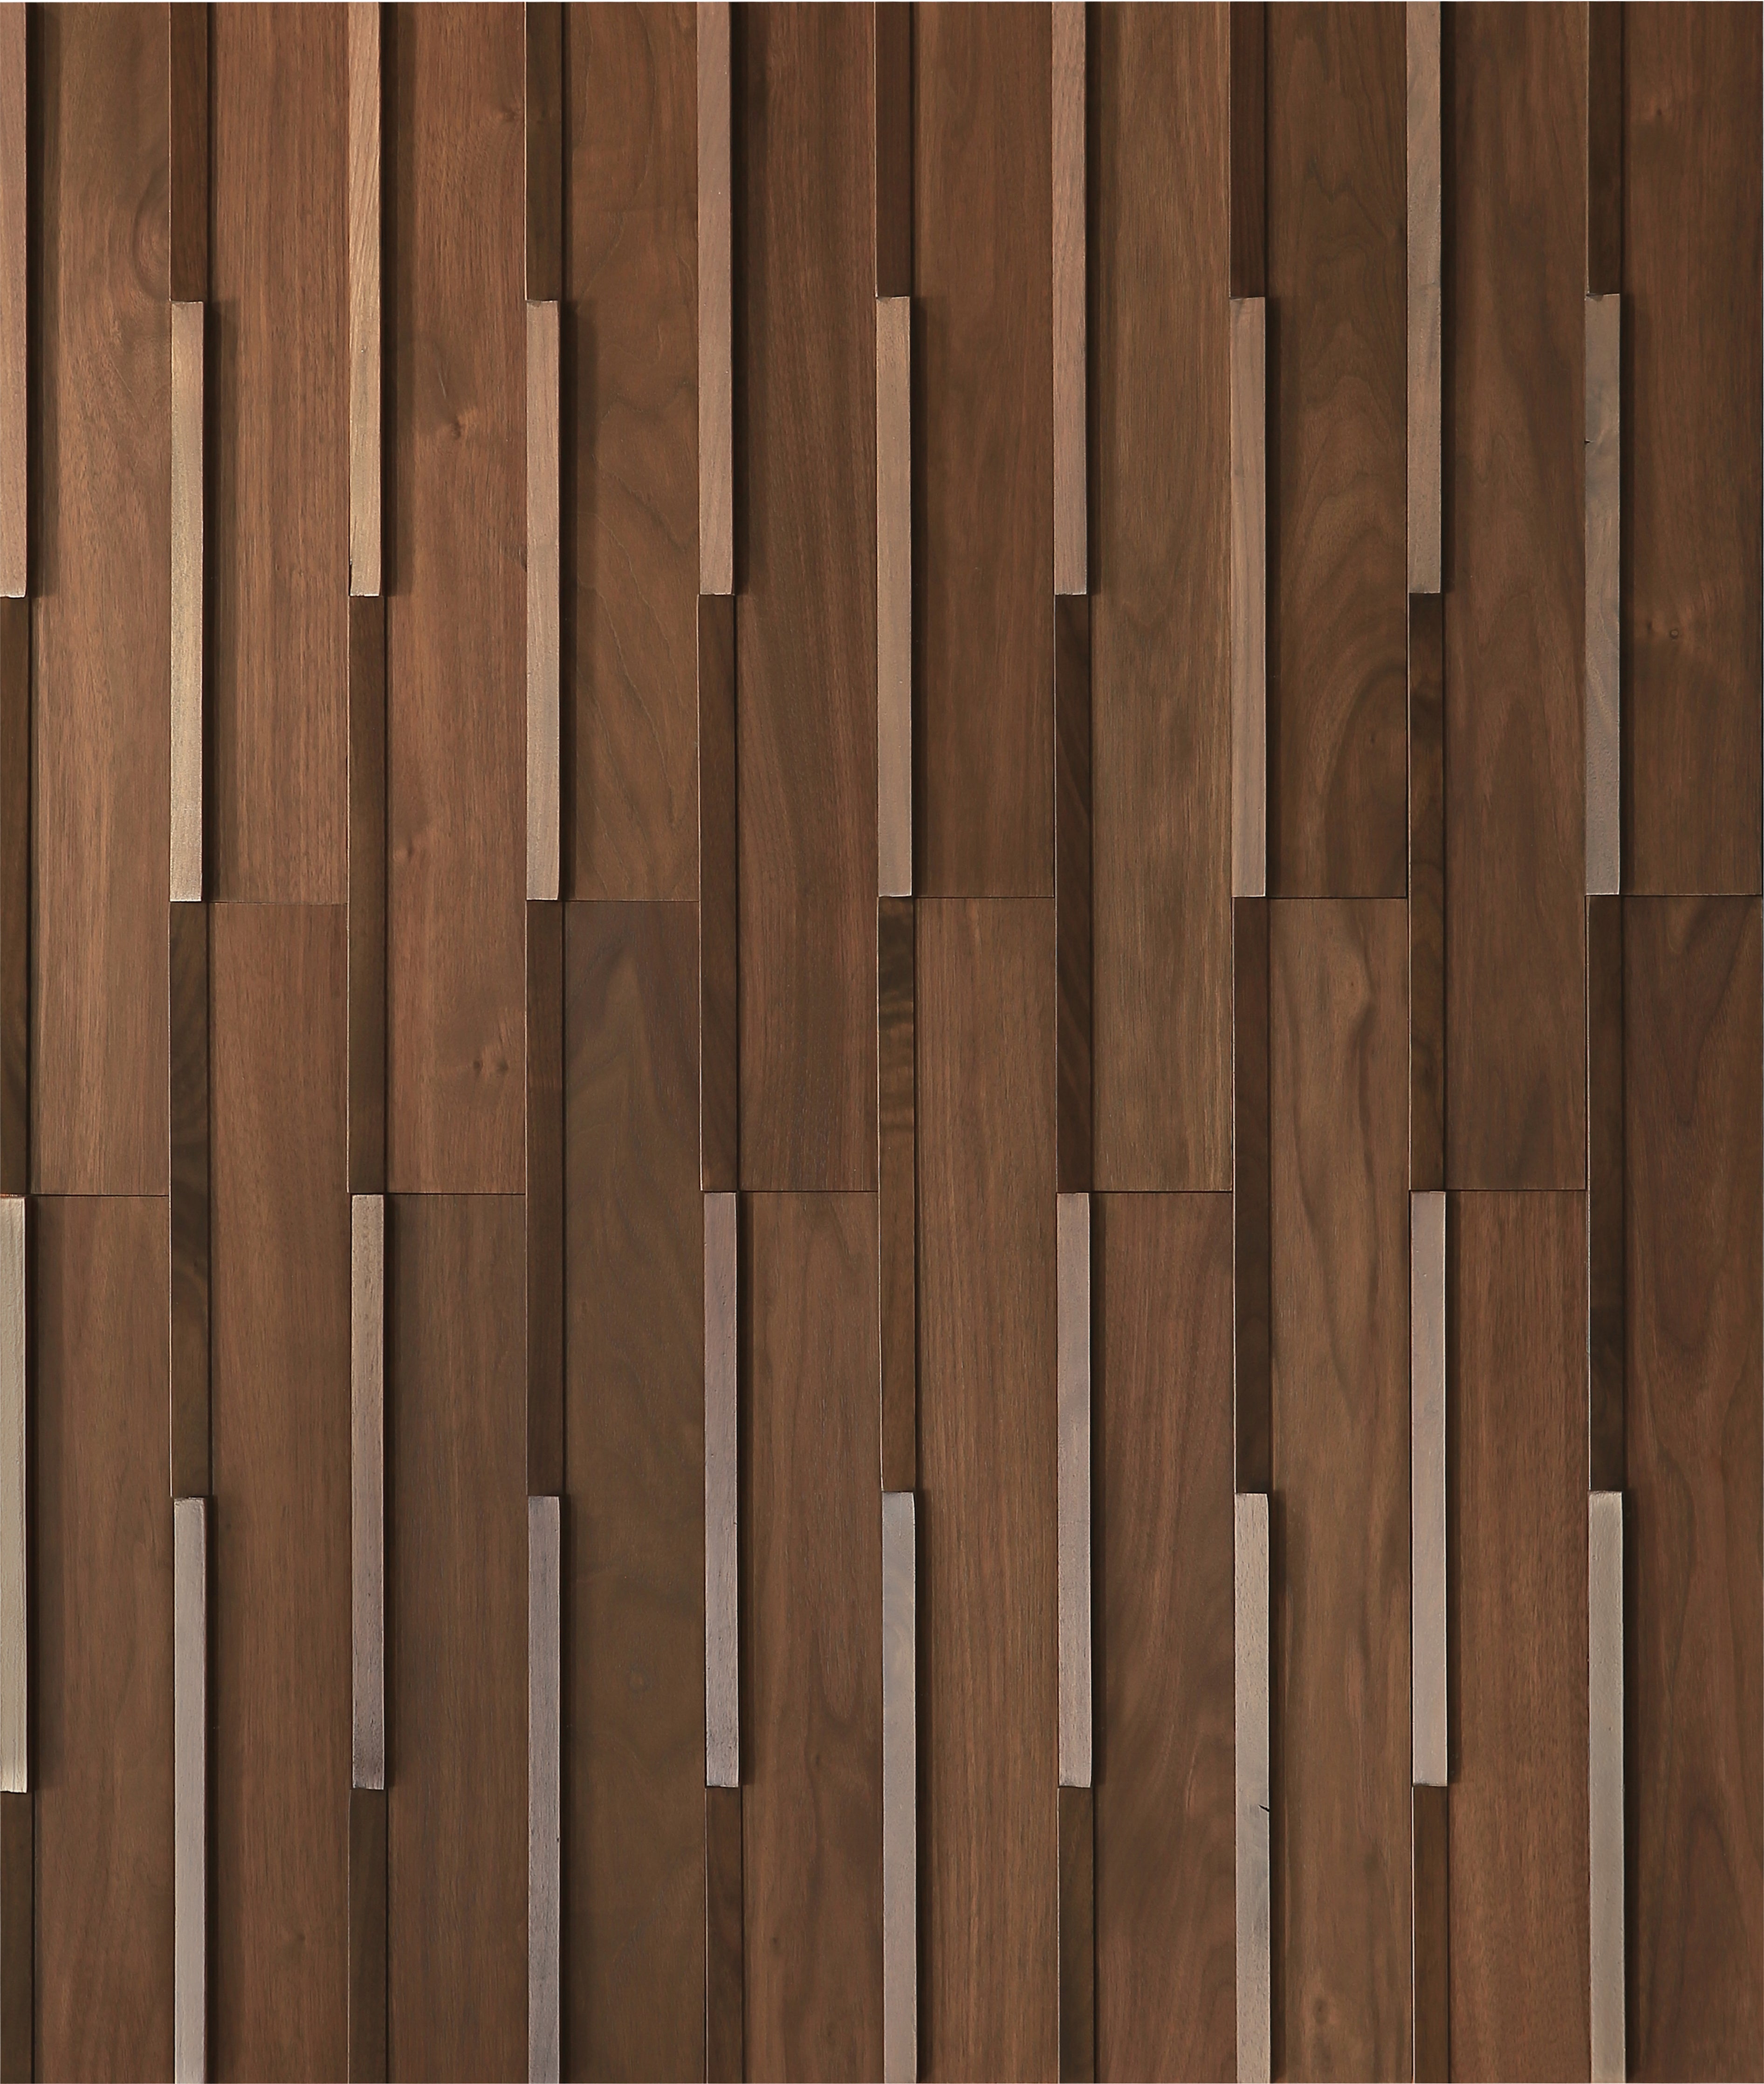 duchateau inceptiv edge stout walnut three dimensional wall natural wood panel conversion varnish for interior use distributed by surface group international